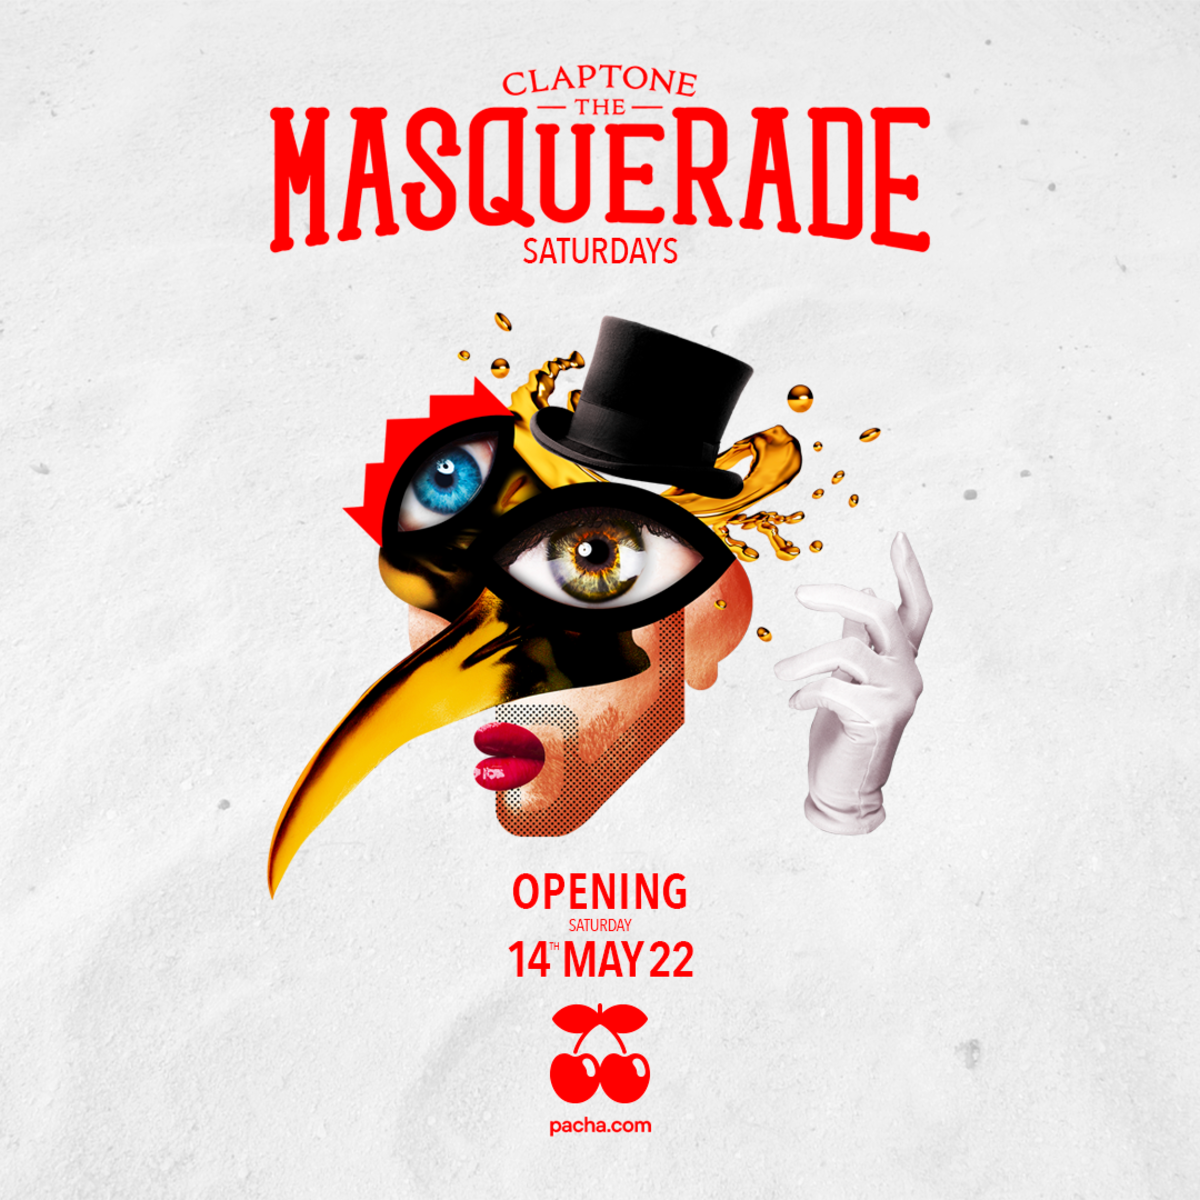 Flyer for Claptone's The Masquerade at Pacha Ibiza, Spain.